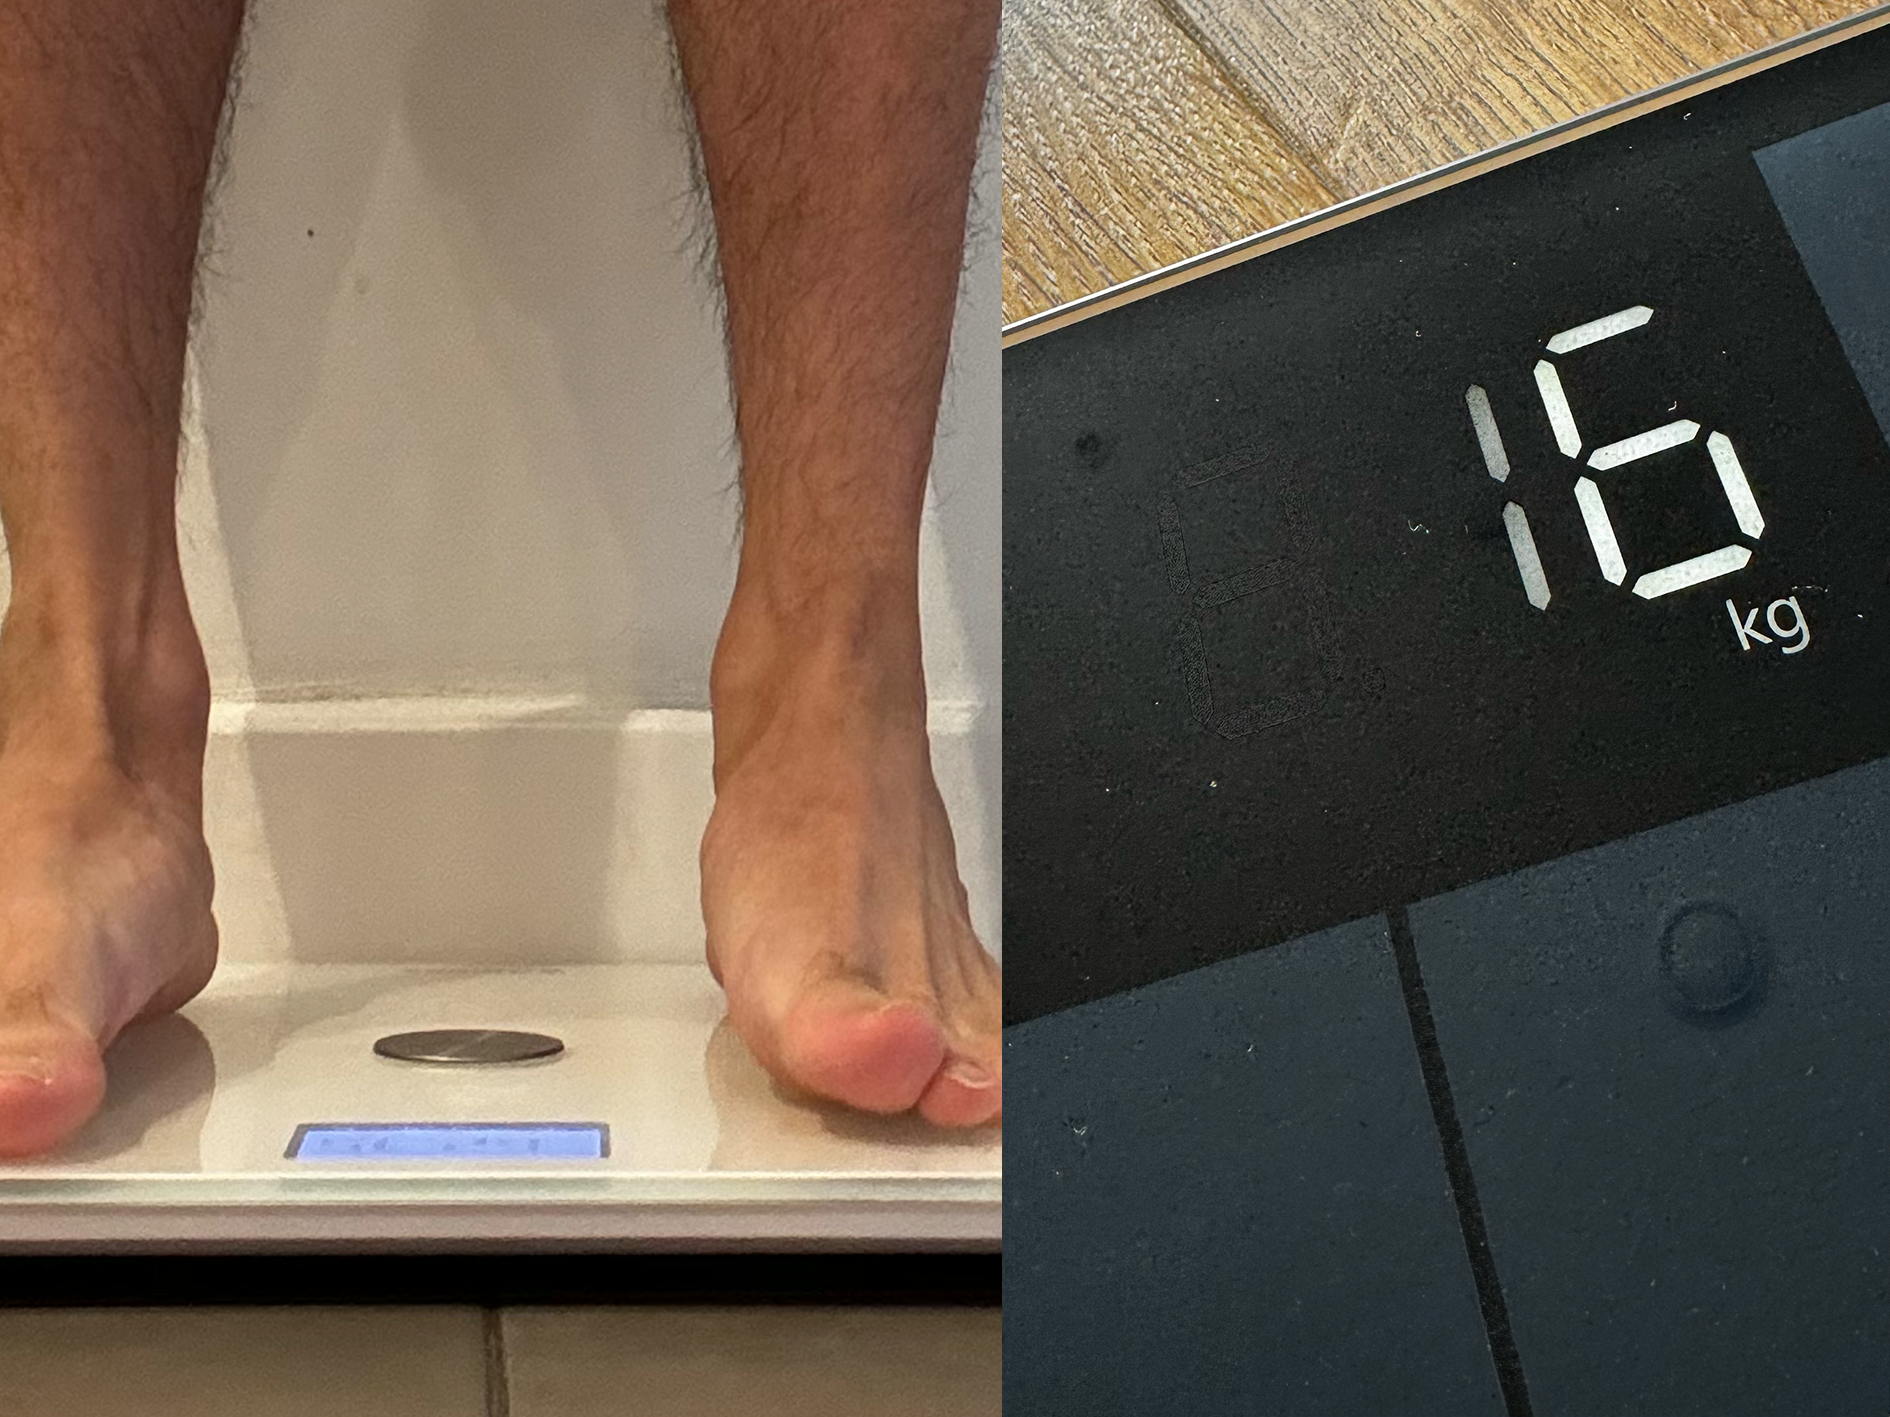 We’ve tried and tested a range of the best bathroom scales